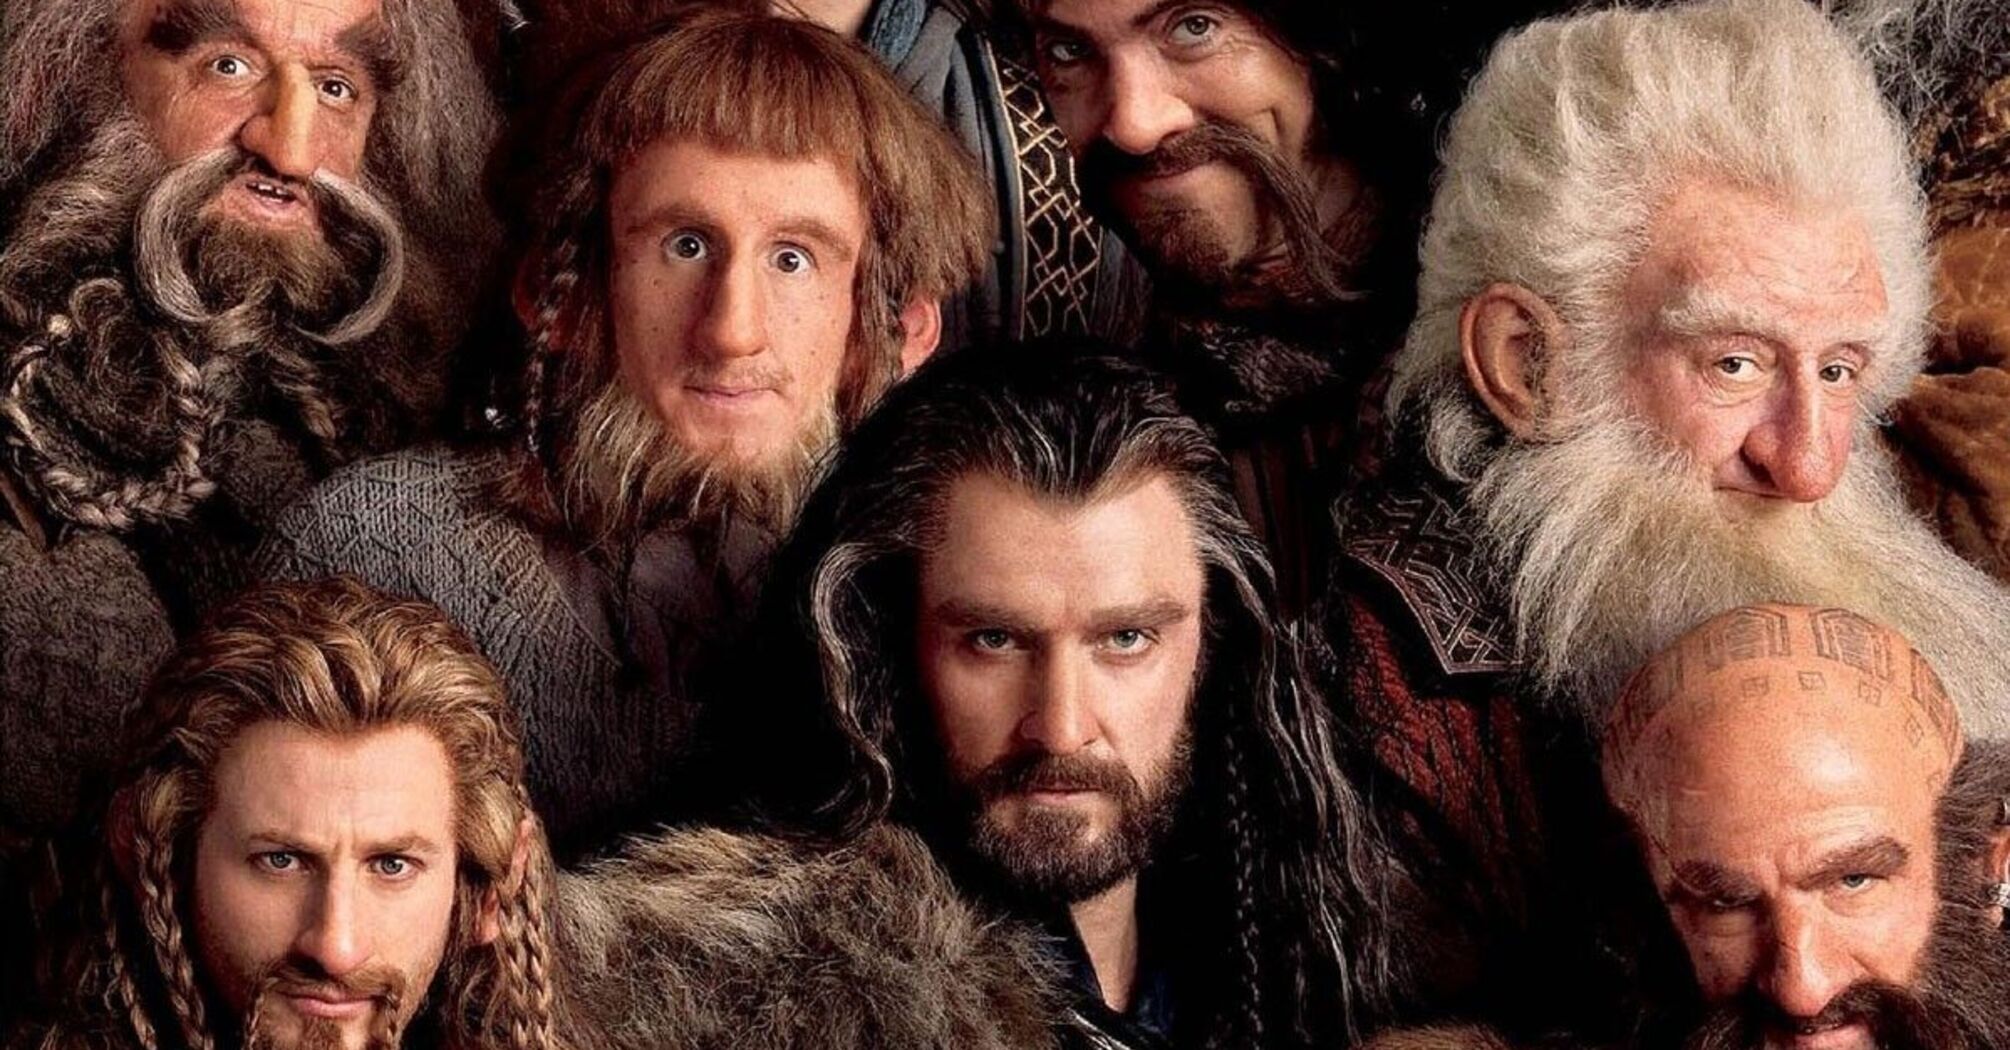 10 moments from "The Hobbit" trilogy that prove it is not inferior to "The Lord of the Rings"